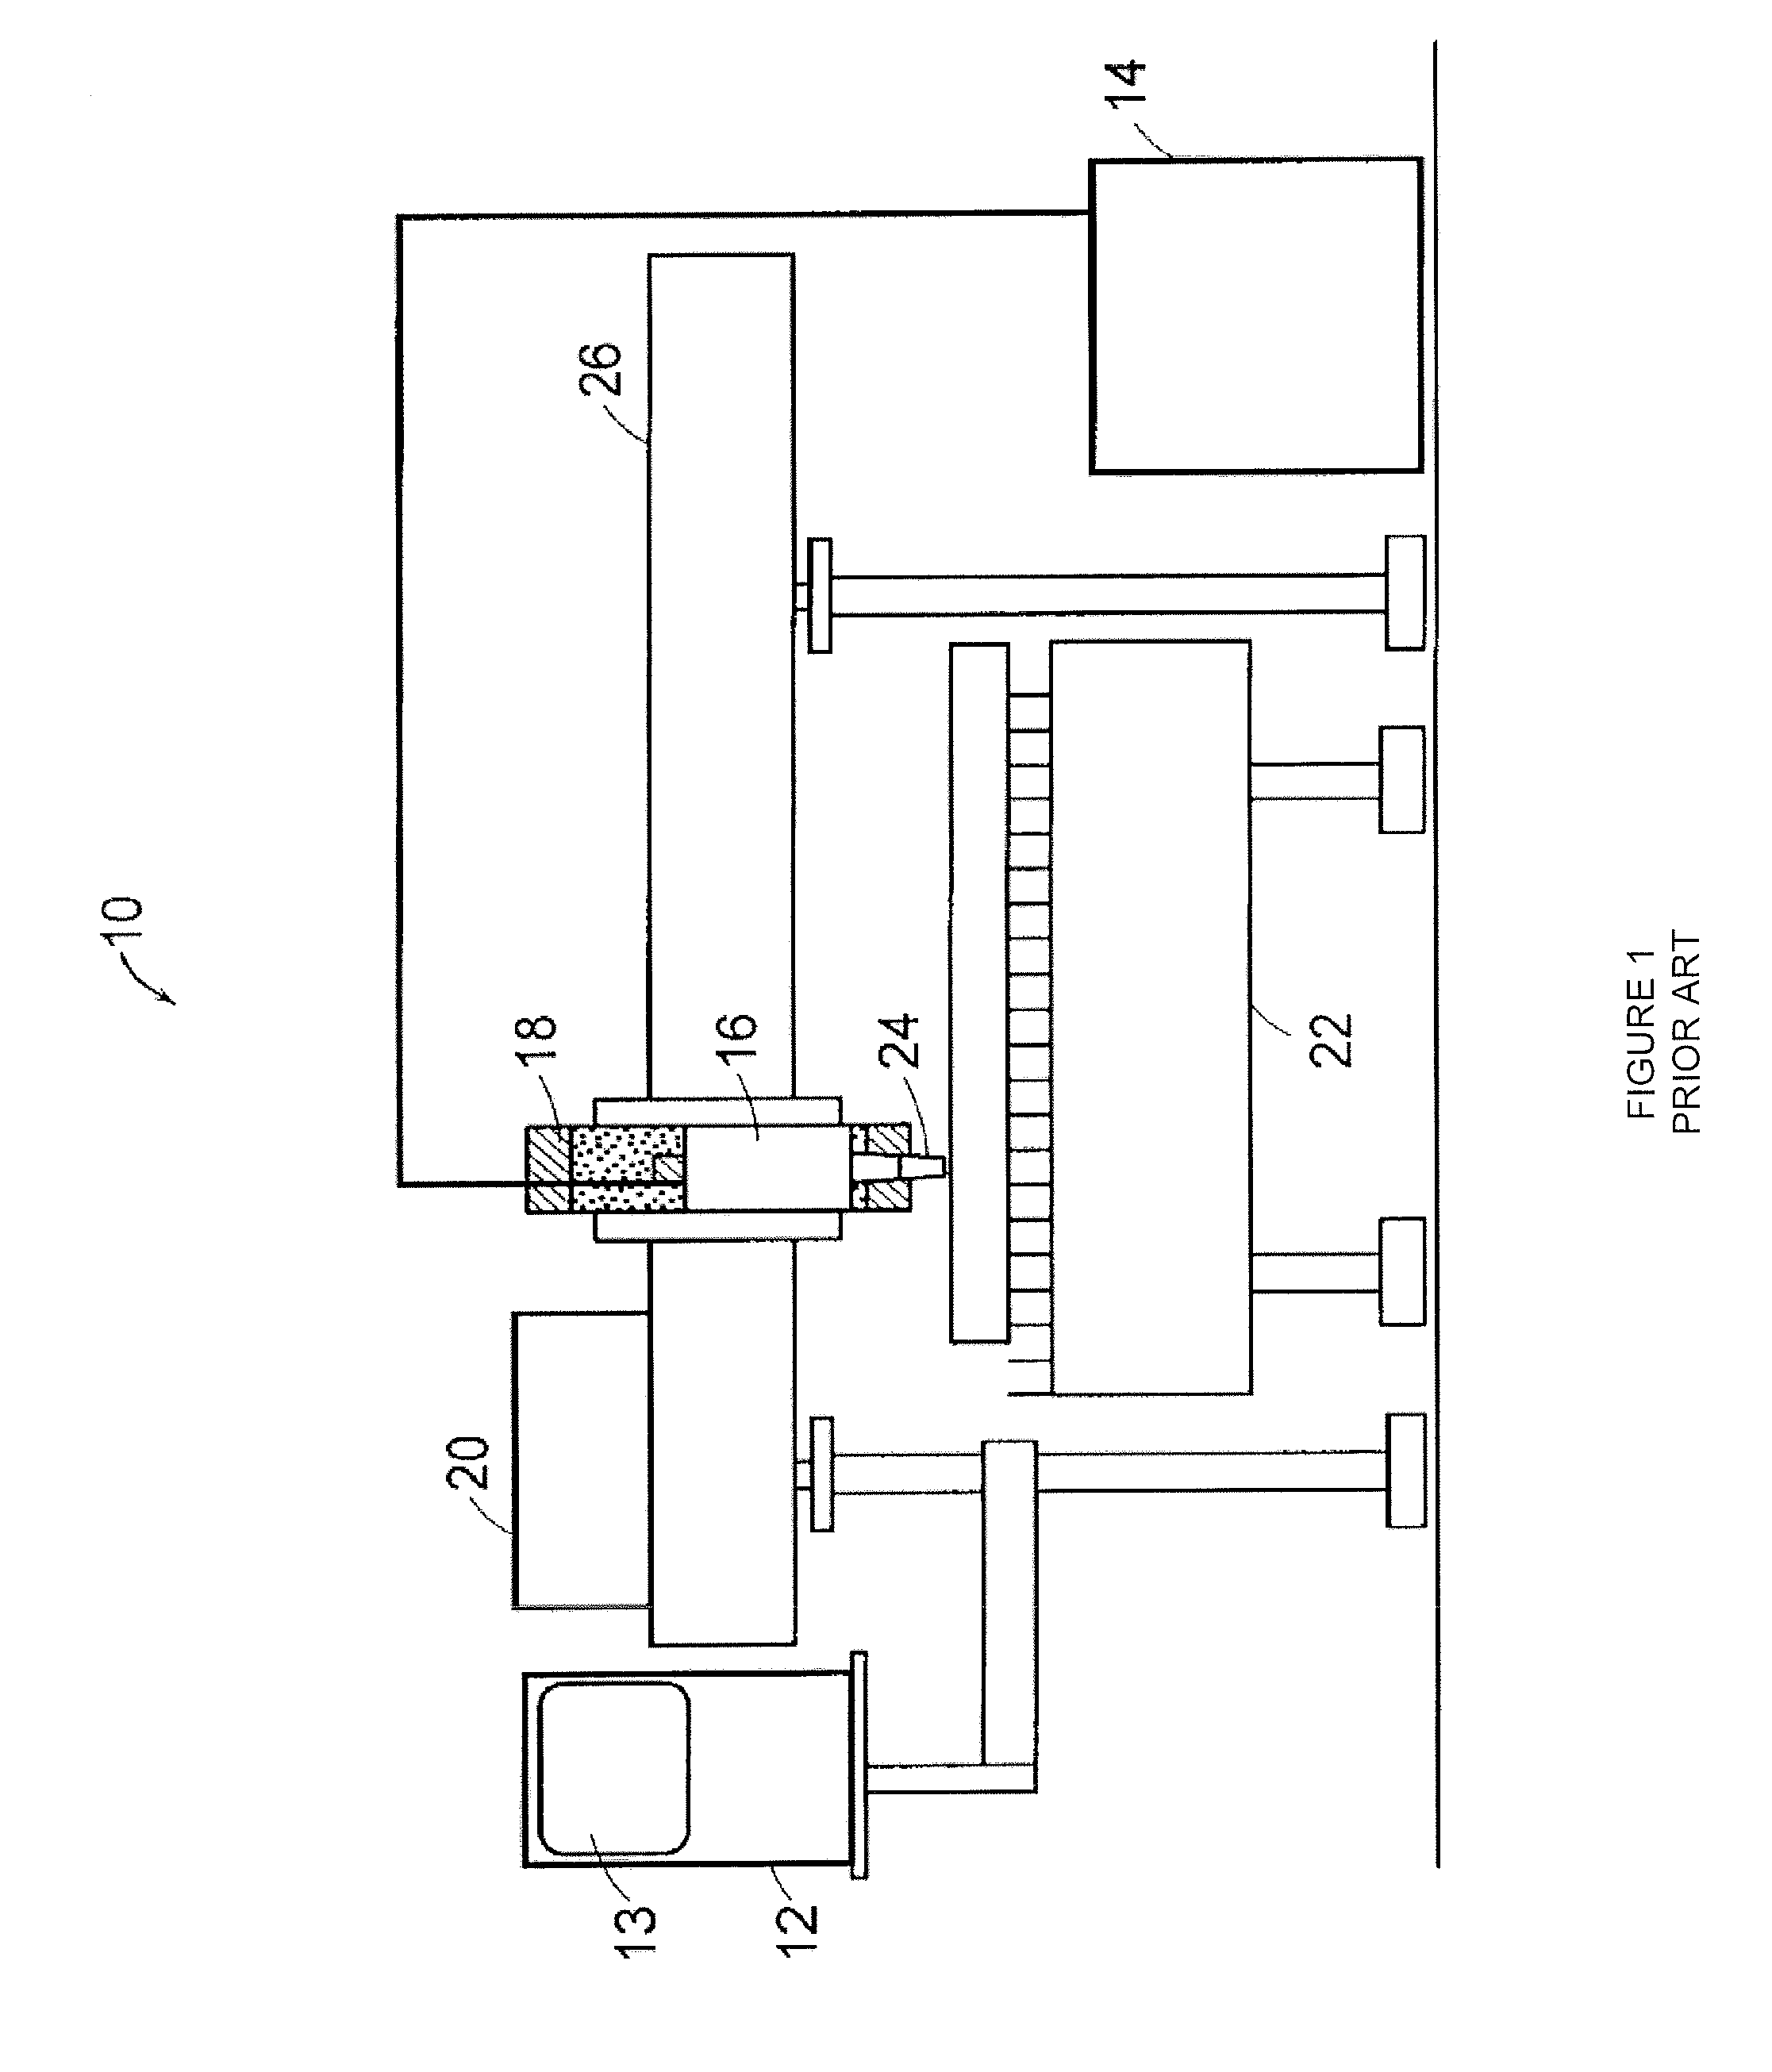 Method and Apparatus for Cutting High Quality Internal Features and Contours